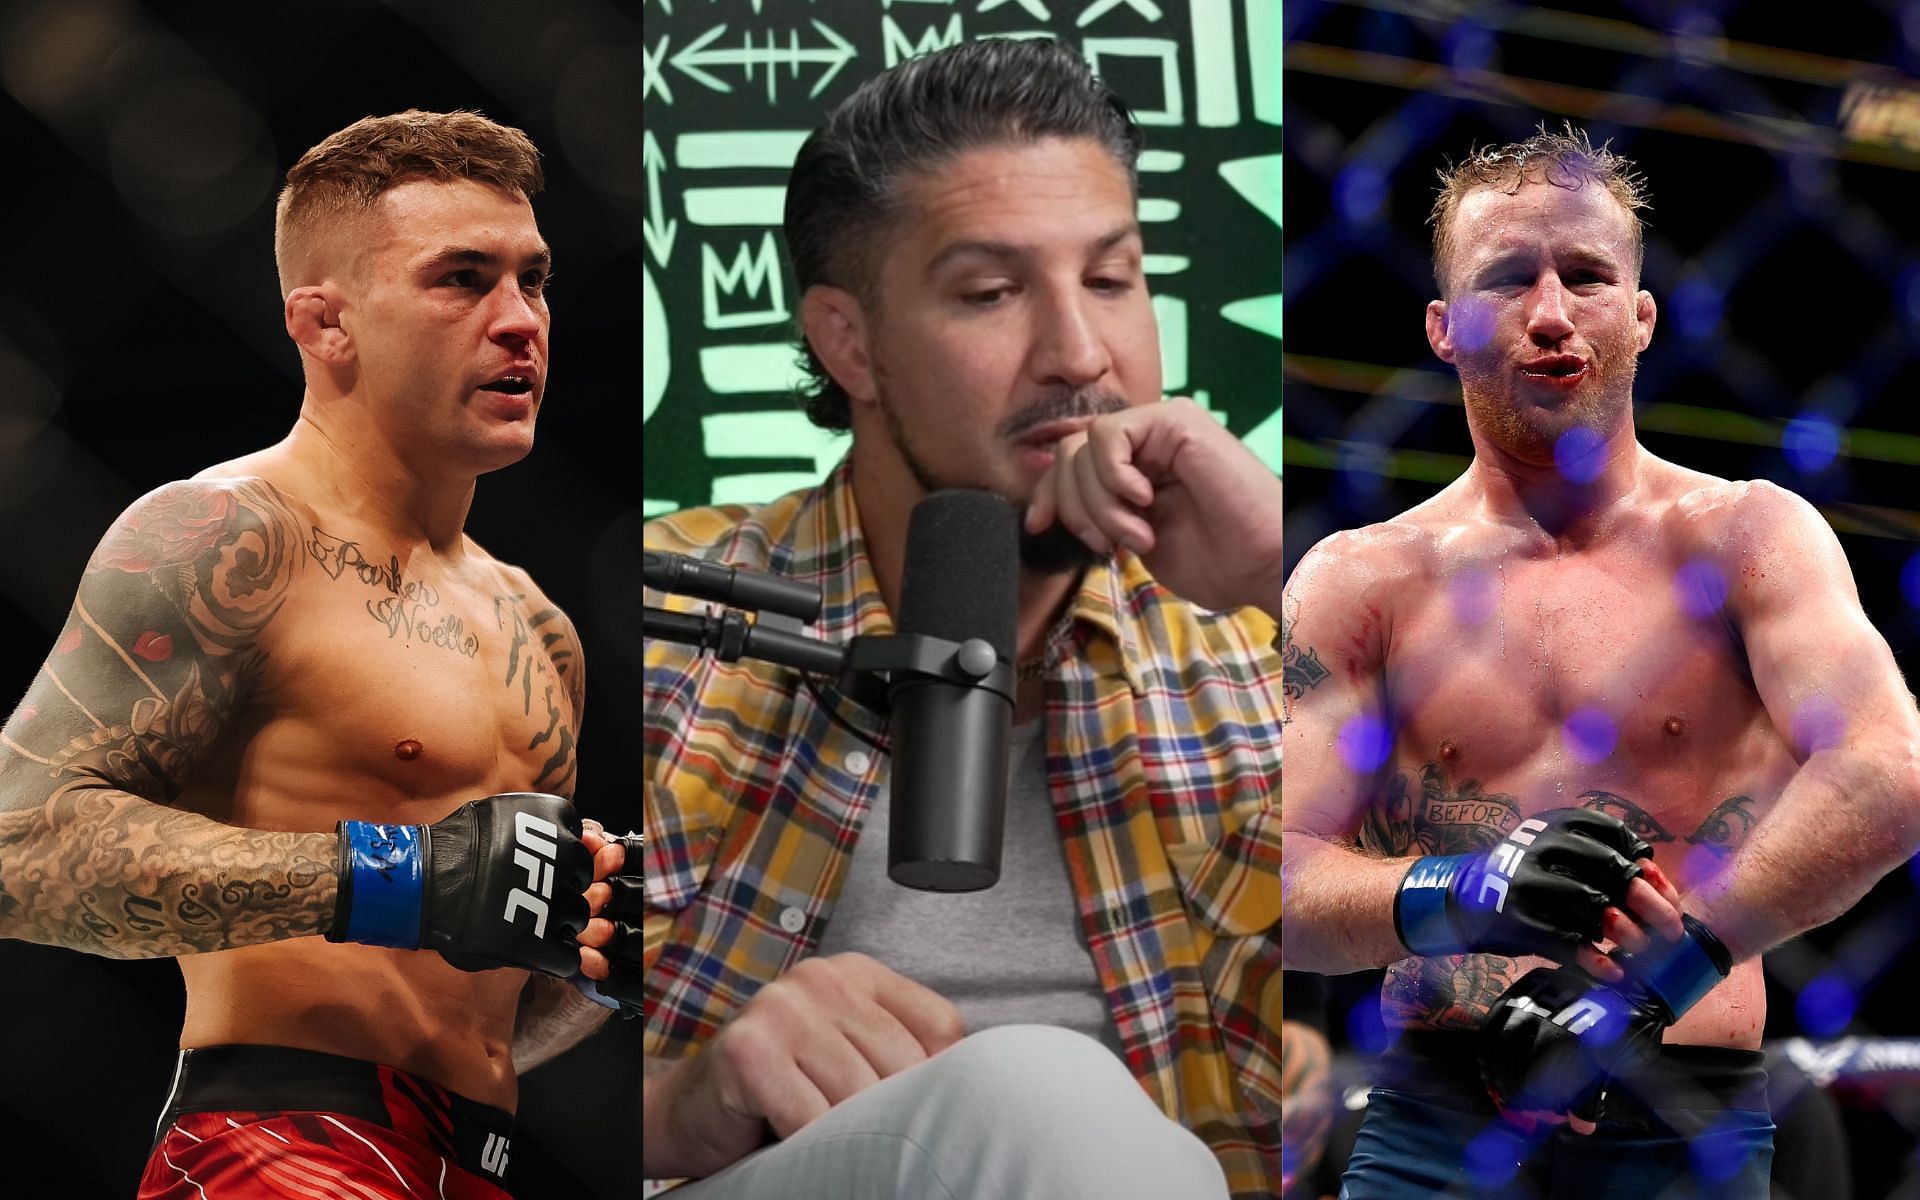 Dustin Poirier (left), Brendan Schaub (center), and Justin Gaethje (right) (Image credits Getty Images and Thicc Boy on YouTube)